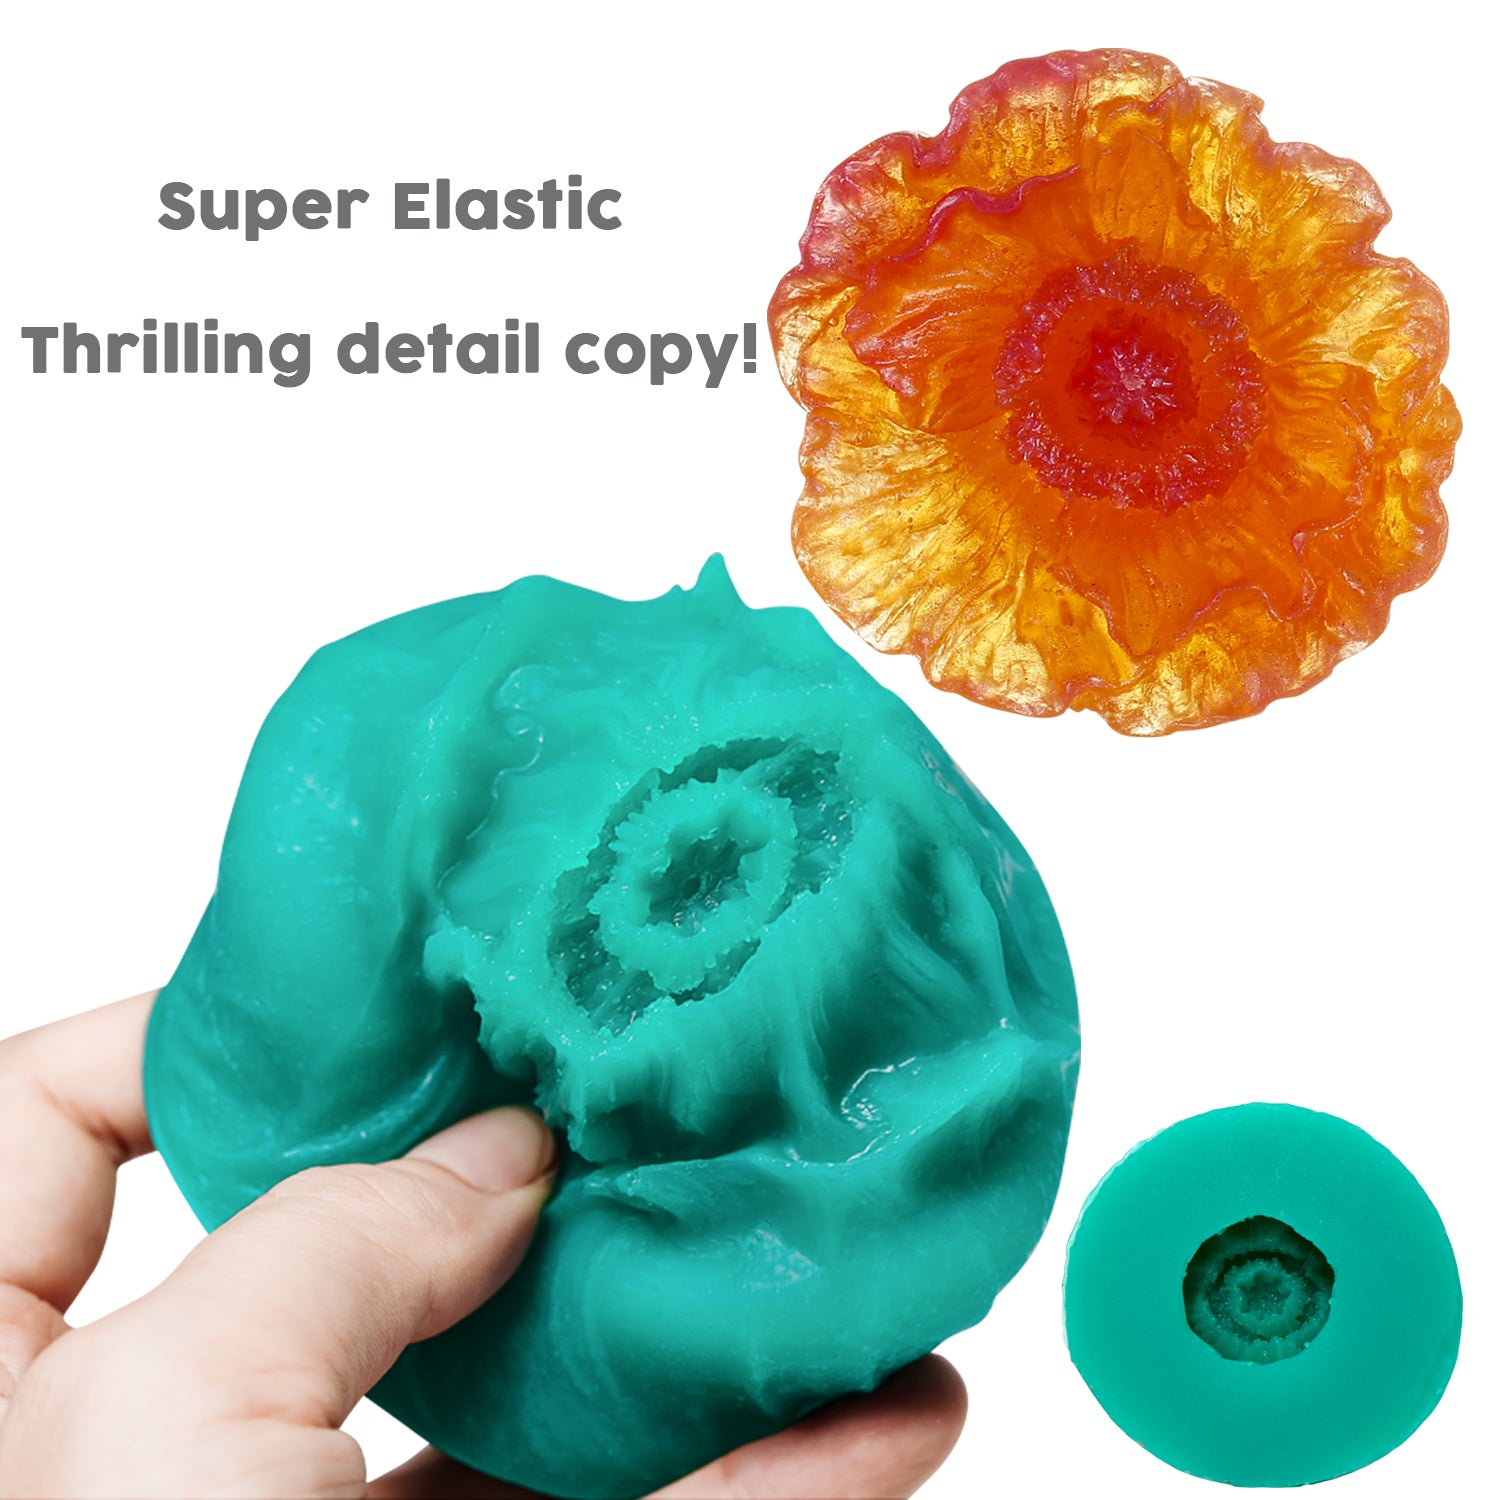 Super Elastic Silicone Mold Making Kit Mold Making Silicone Rubber Liquid  3D New